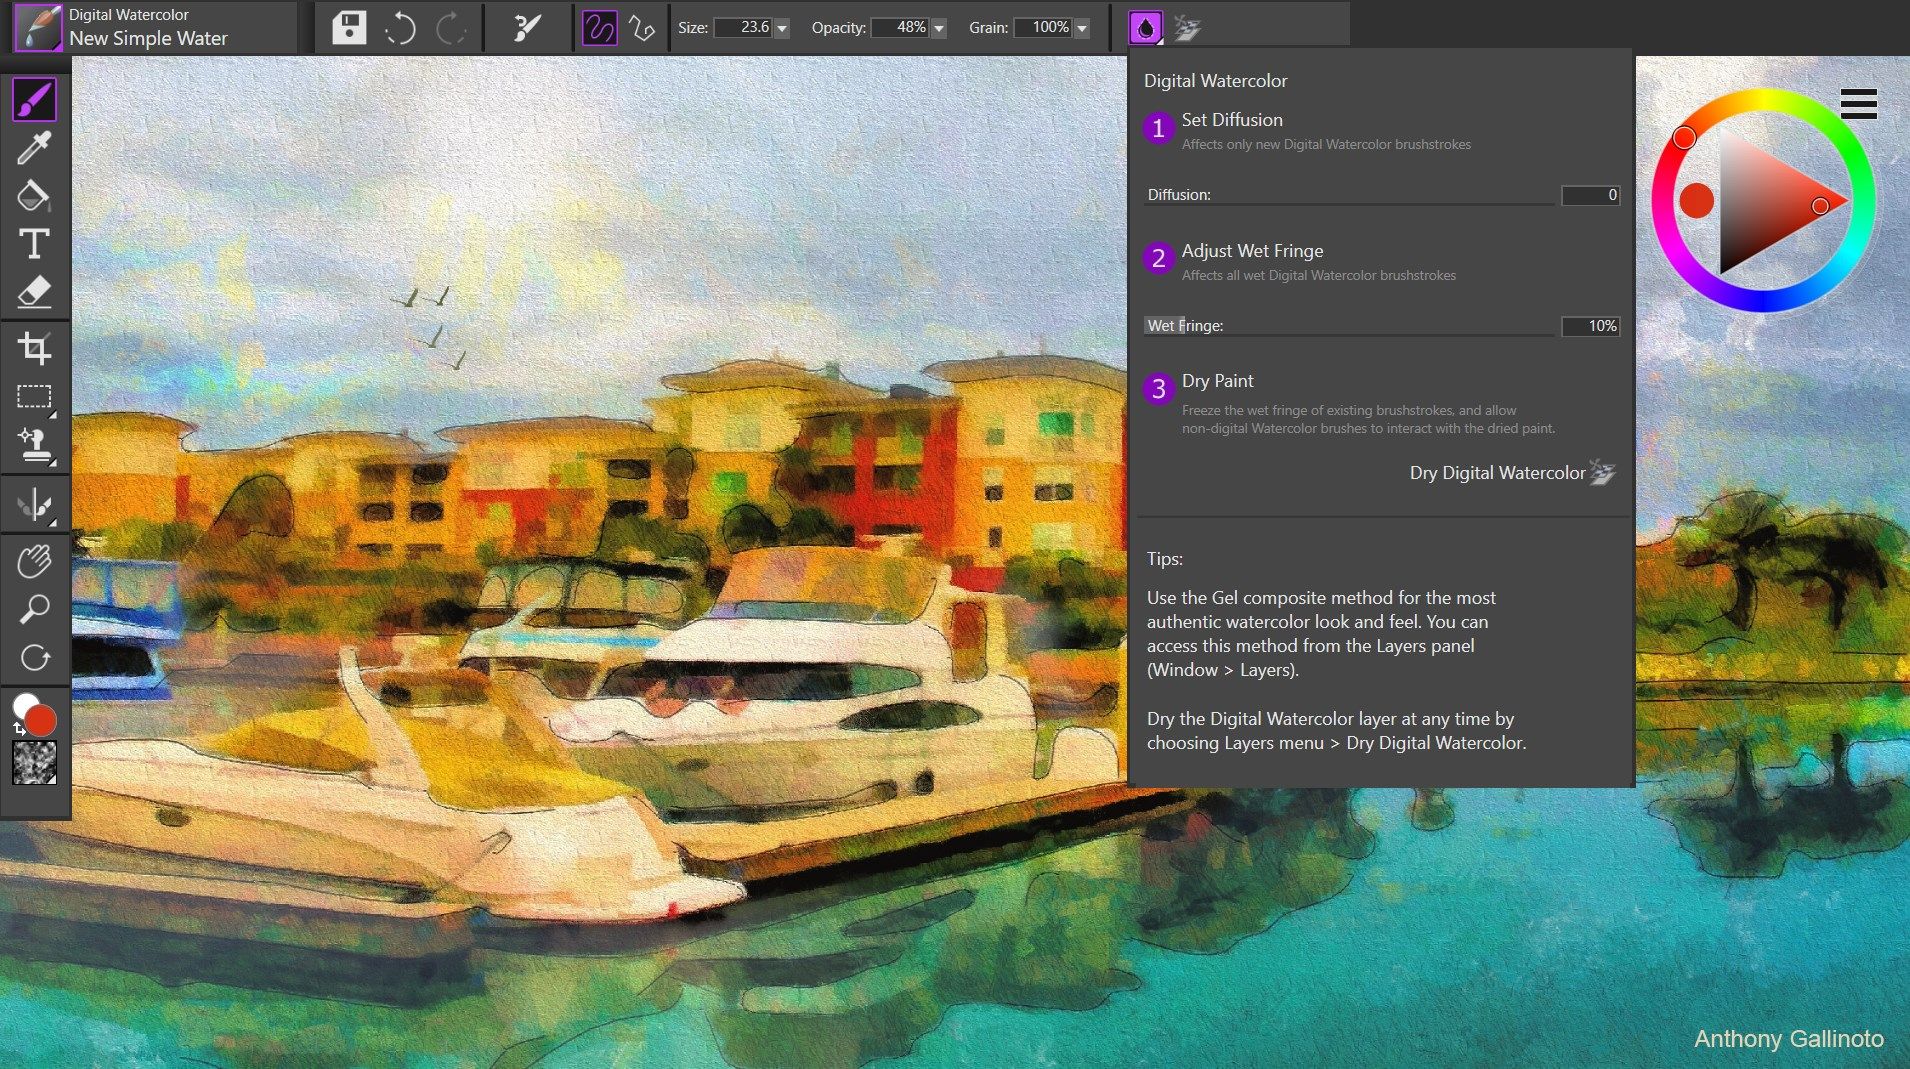 Try digital watercolors that react with canvas textures just like real watercolors!